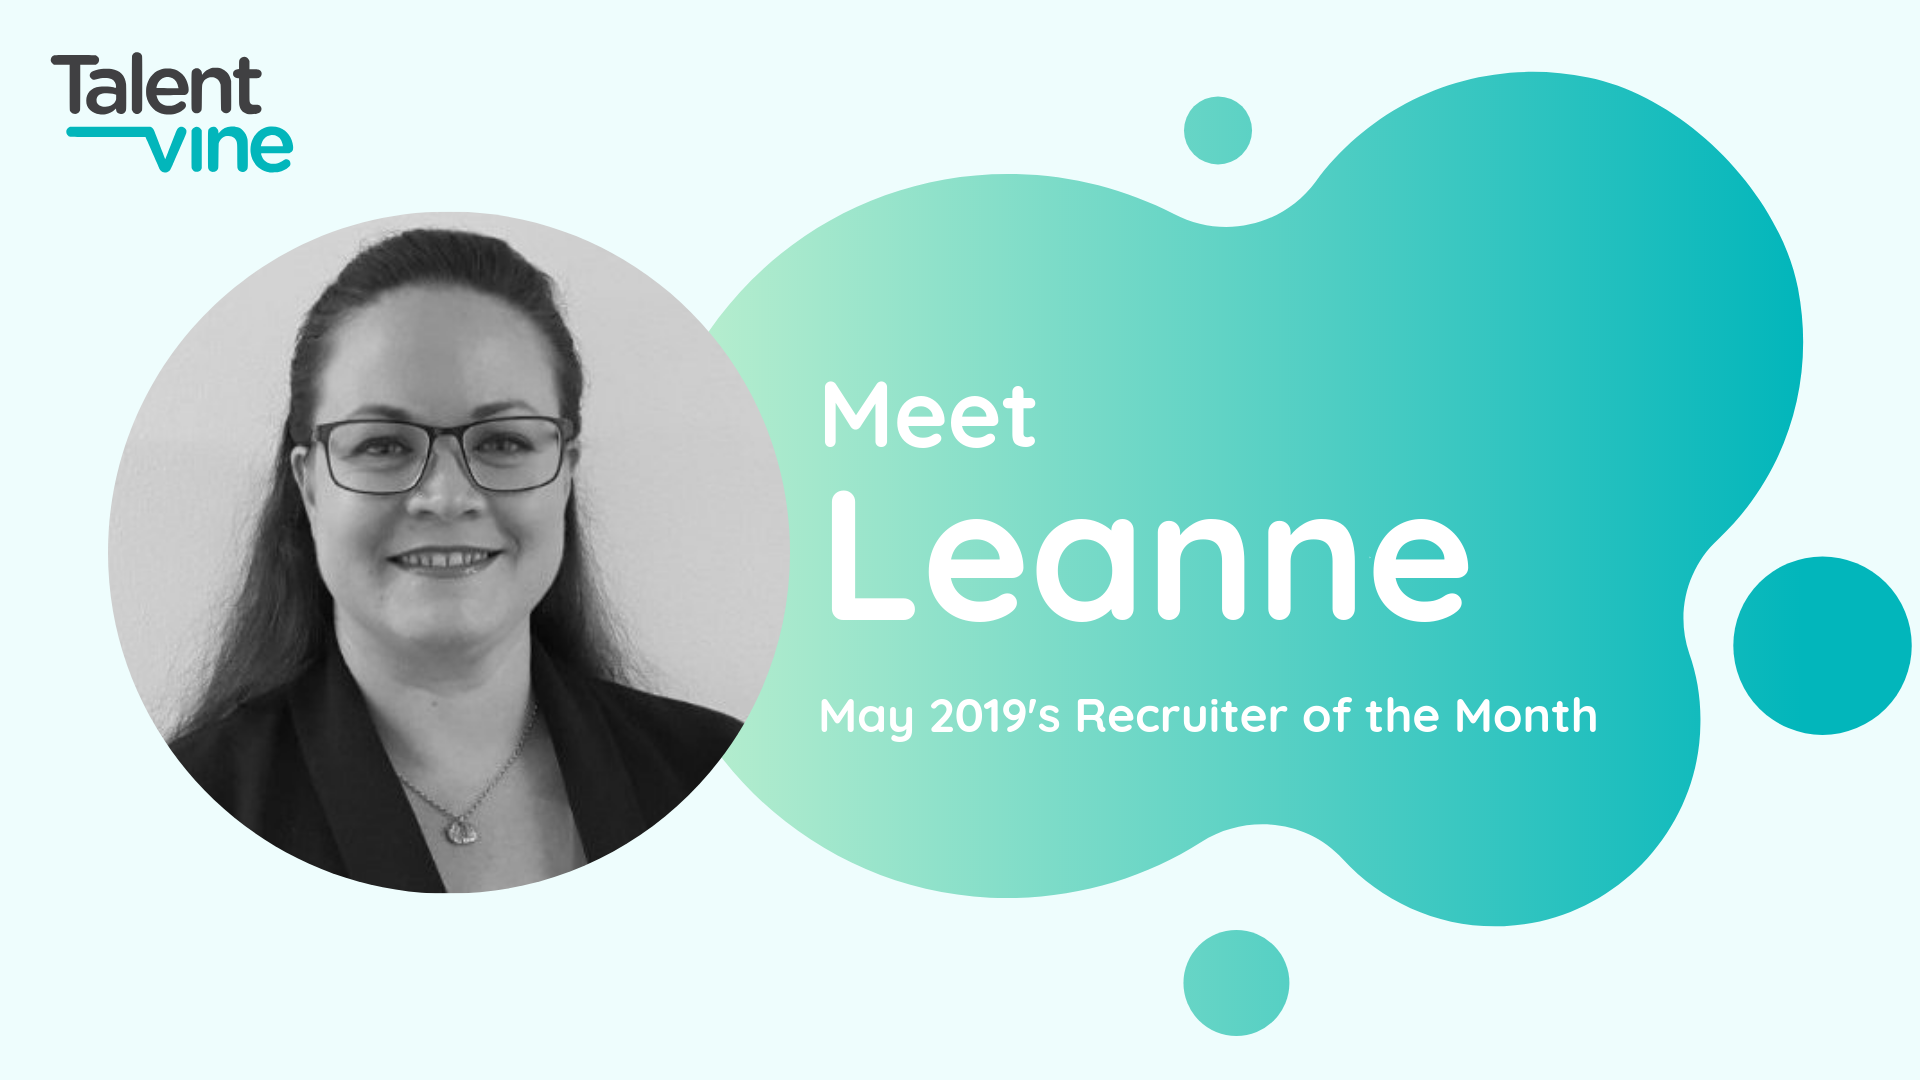 Meet Leanne - TalentVine May 2019's Recruiter of the Month